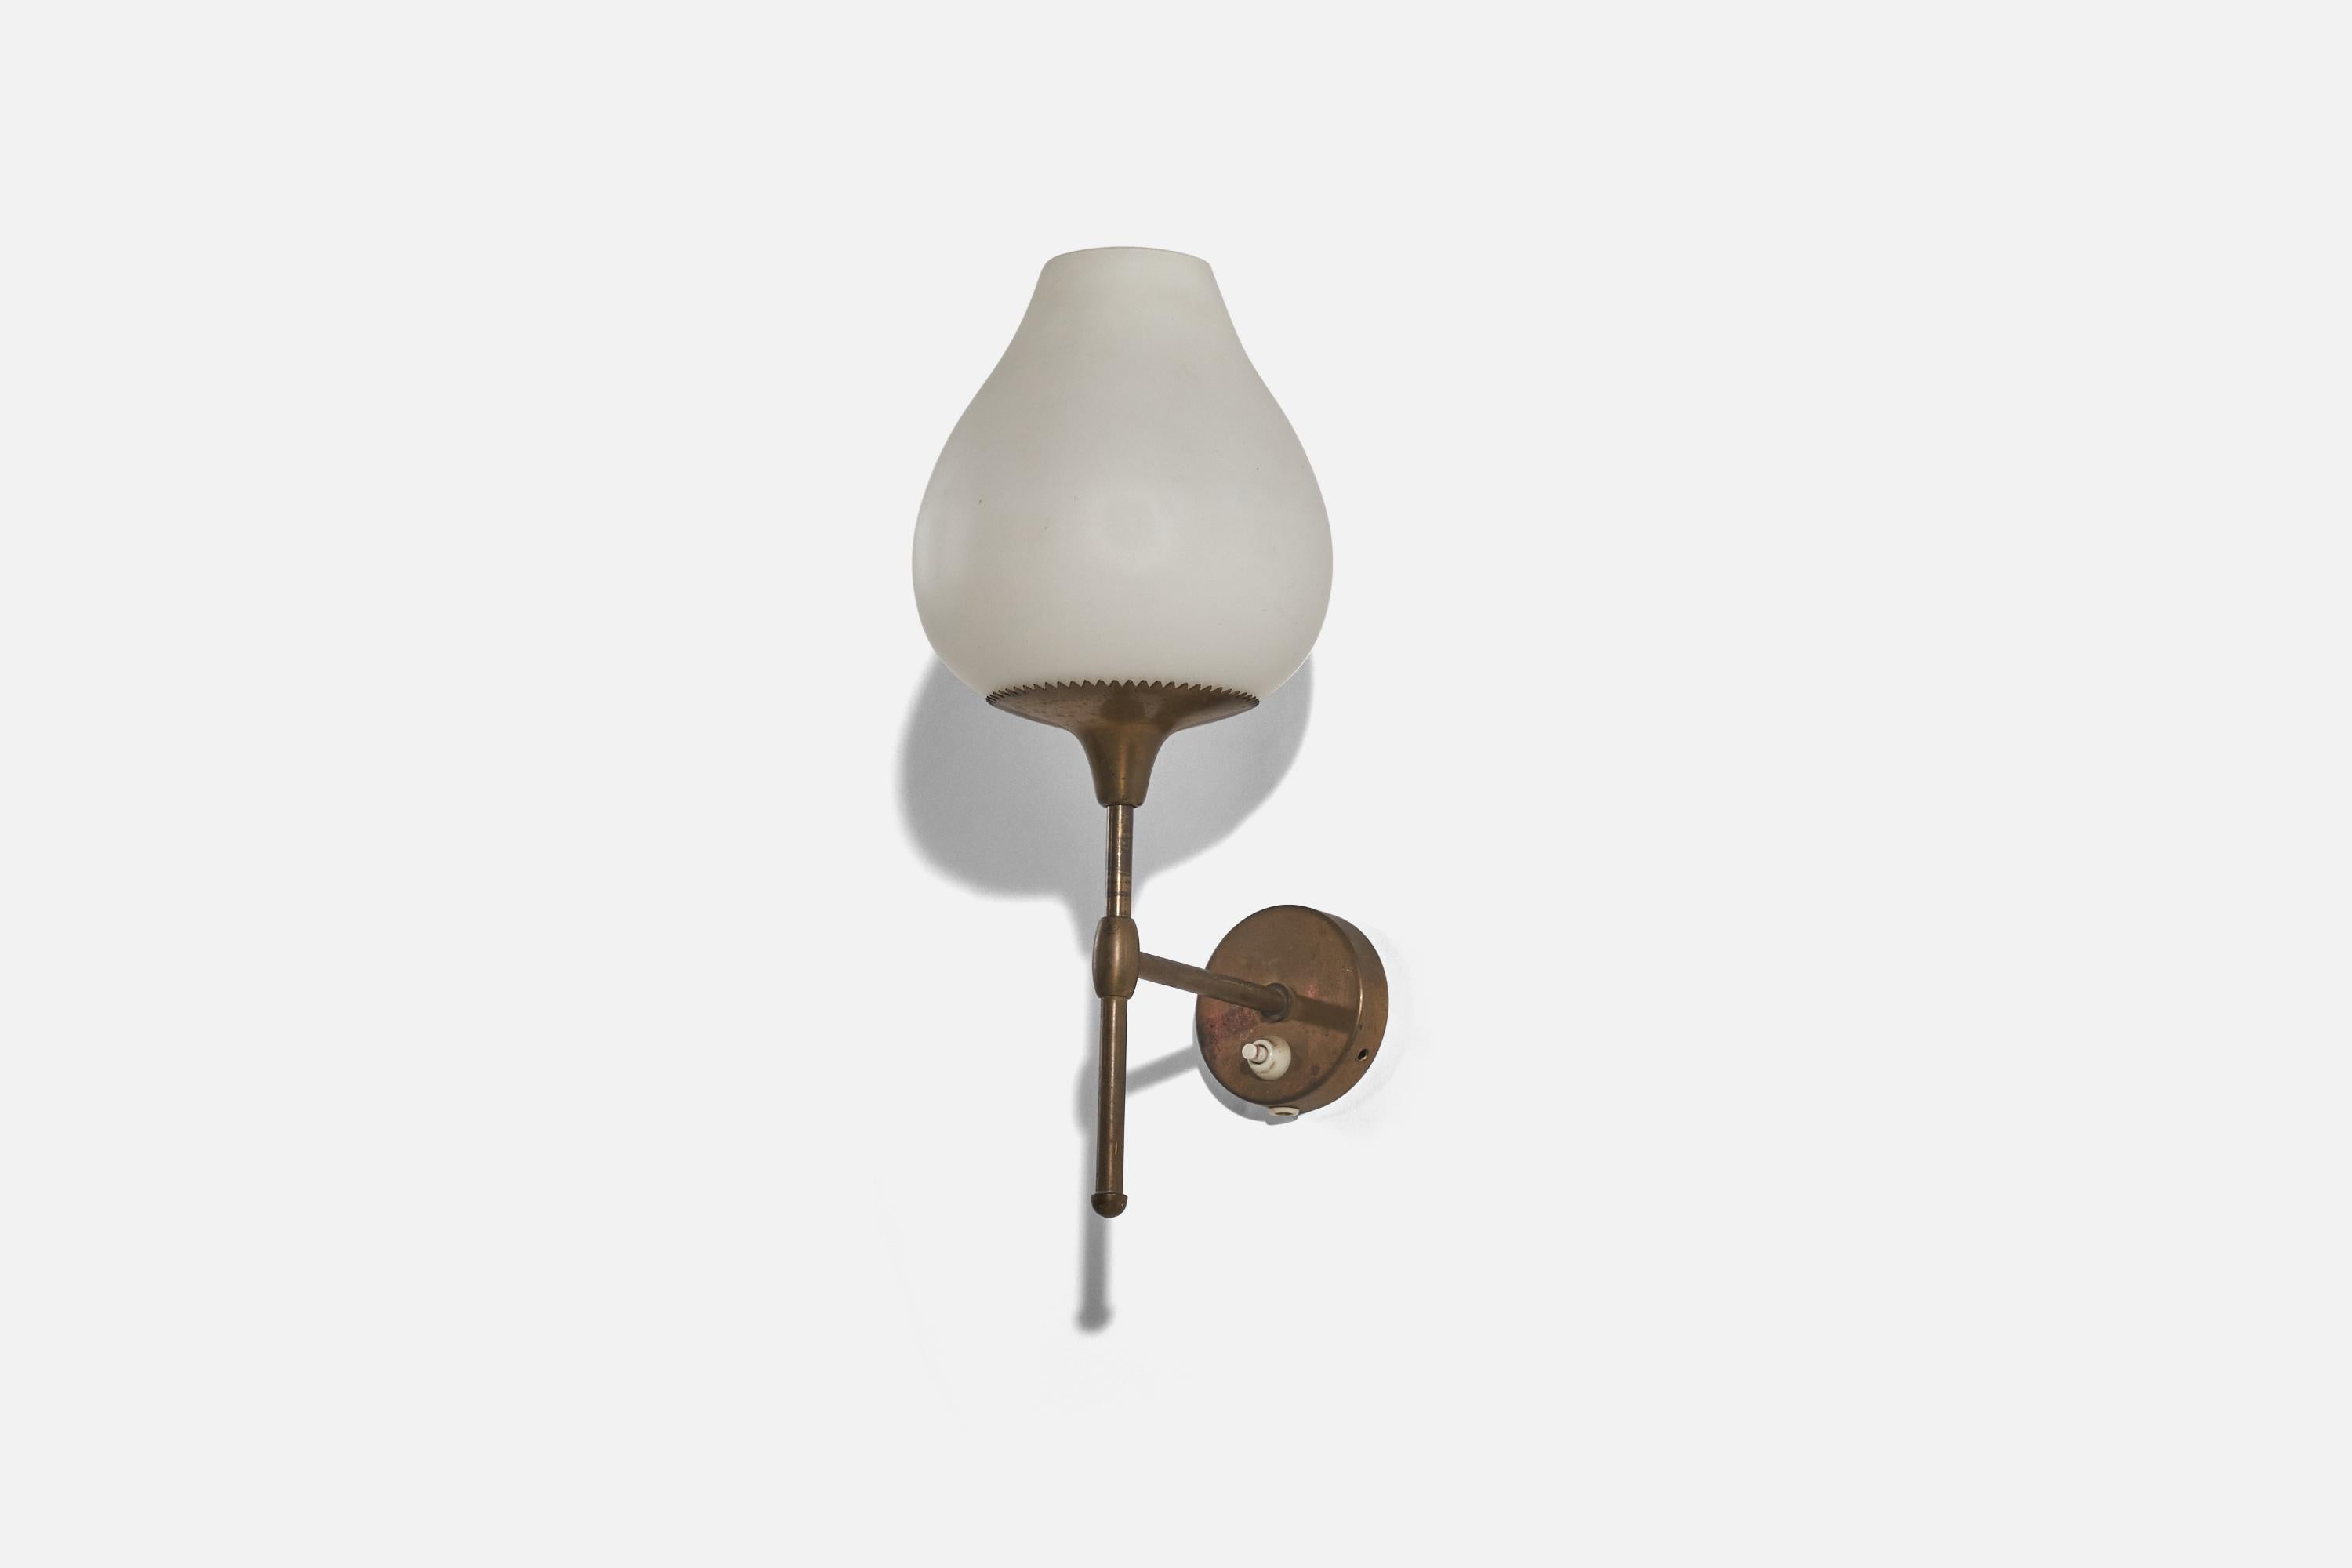 A brass and milk glass wall light designed by Alf Svensson and produced by Bergboms, Sweden, c. 1950s.

Dimensions of back plate (inches) : 2.93 x 2.93 x 0.71 (height x width x depth).

There is no maximum wattage stated on the fixture. 
Socket